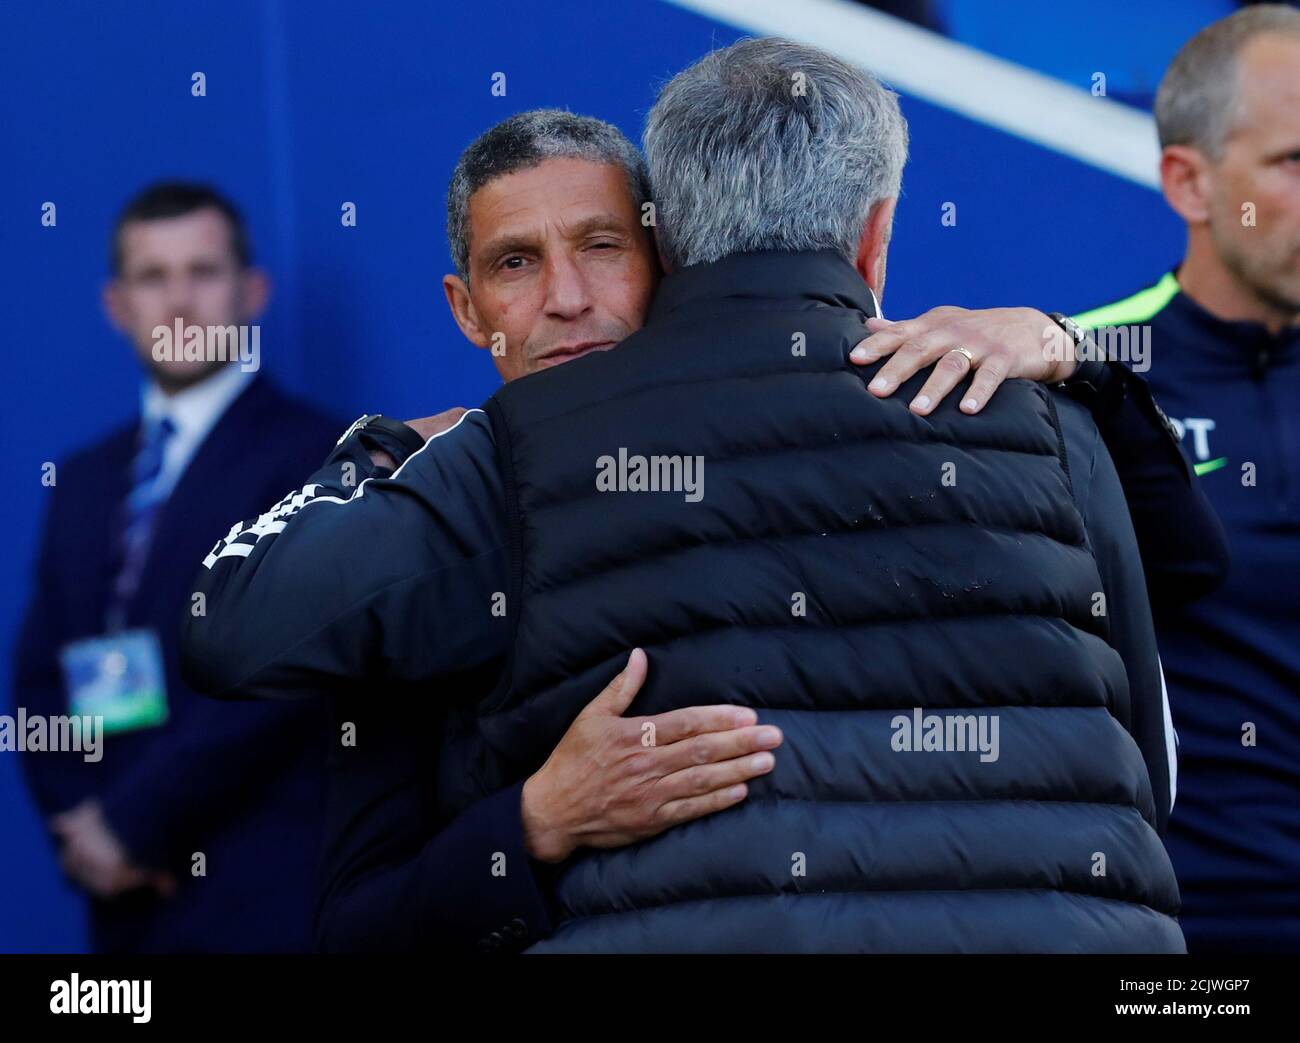 Soccer Football - Premier League - Brighton & Hove Albion v Manchester United - The American Express Community Stadium, Brighton, Britain - May 4, 2018   Manchester United manager Jose Mourinho and Brighton manager Chris Hughton before the match   REUTERS/Eddie Keogh    EDITORIAL USE ONLY. No use with unauthorized audio, video, data, fixture lists, club/league logos or "live" services. Online in-match use limited to 75 images, no video emulation. No use in betting, games or single club/league/player publications.  Please contact your account representative for further details. Stock Photo